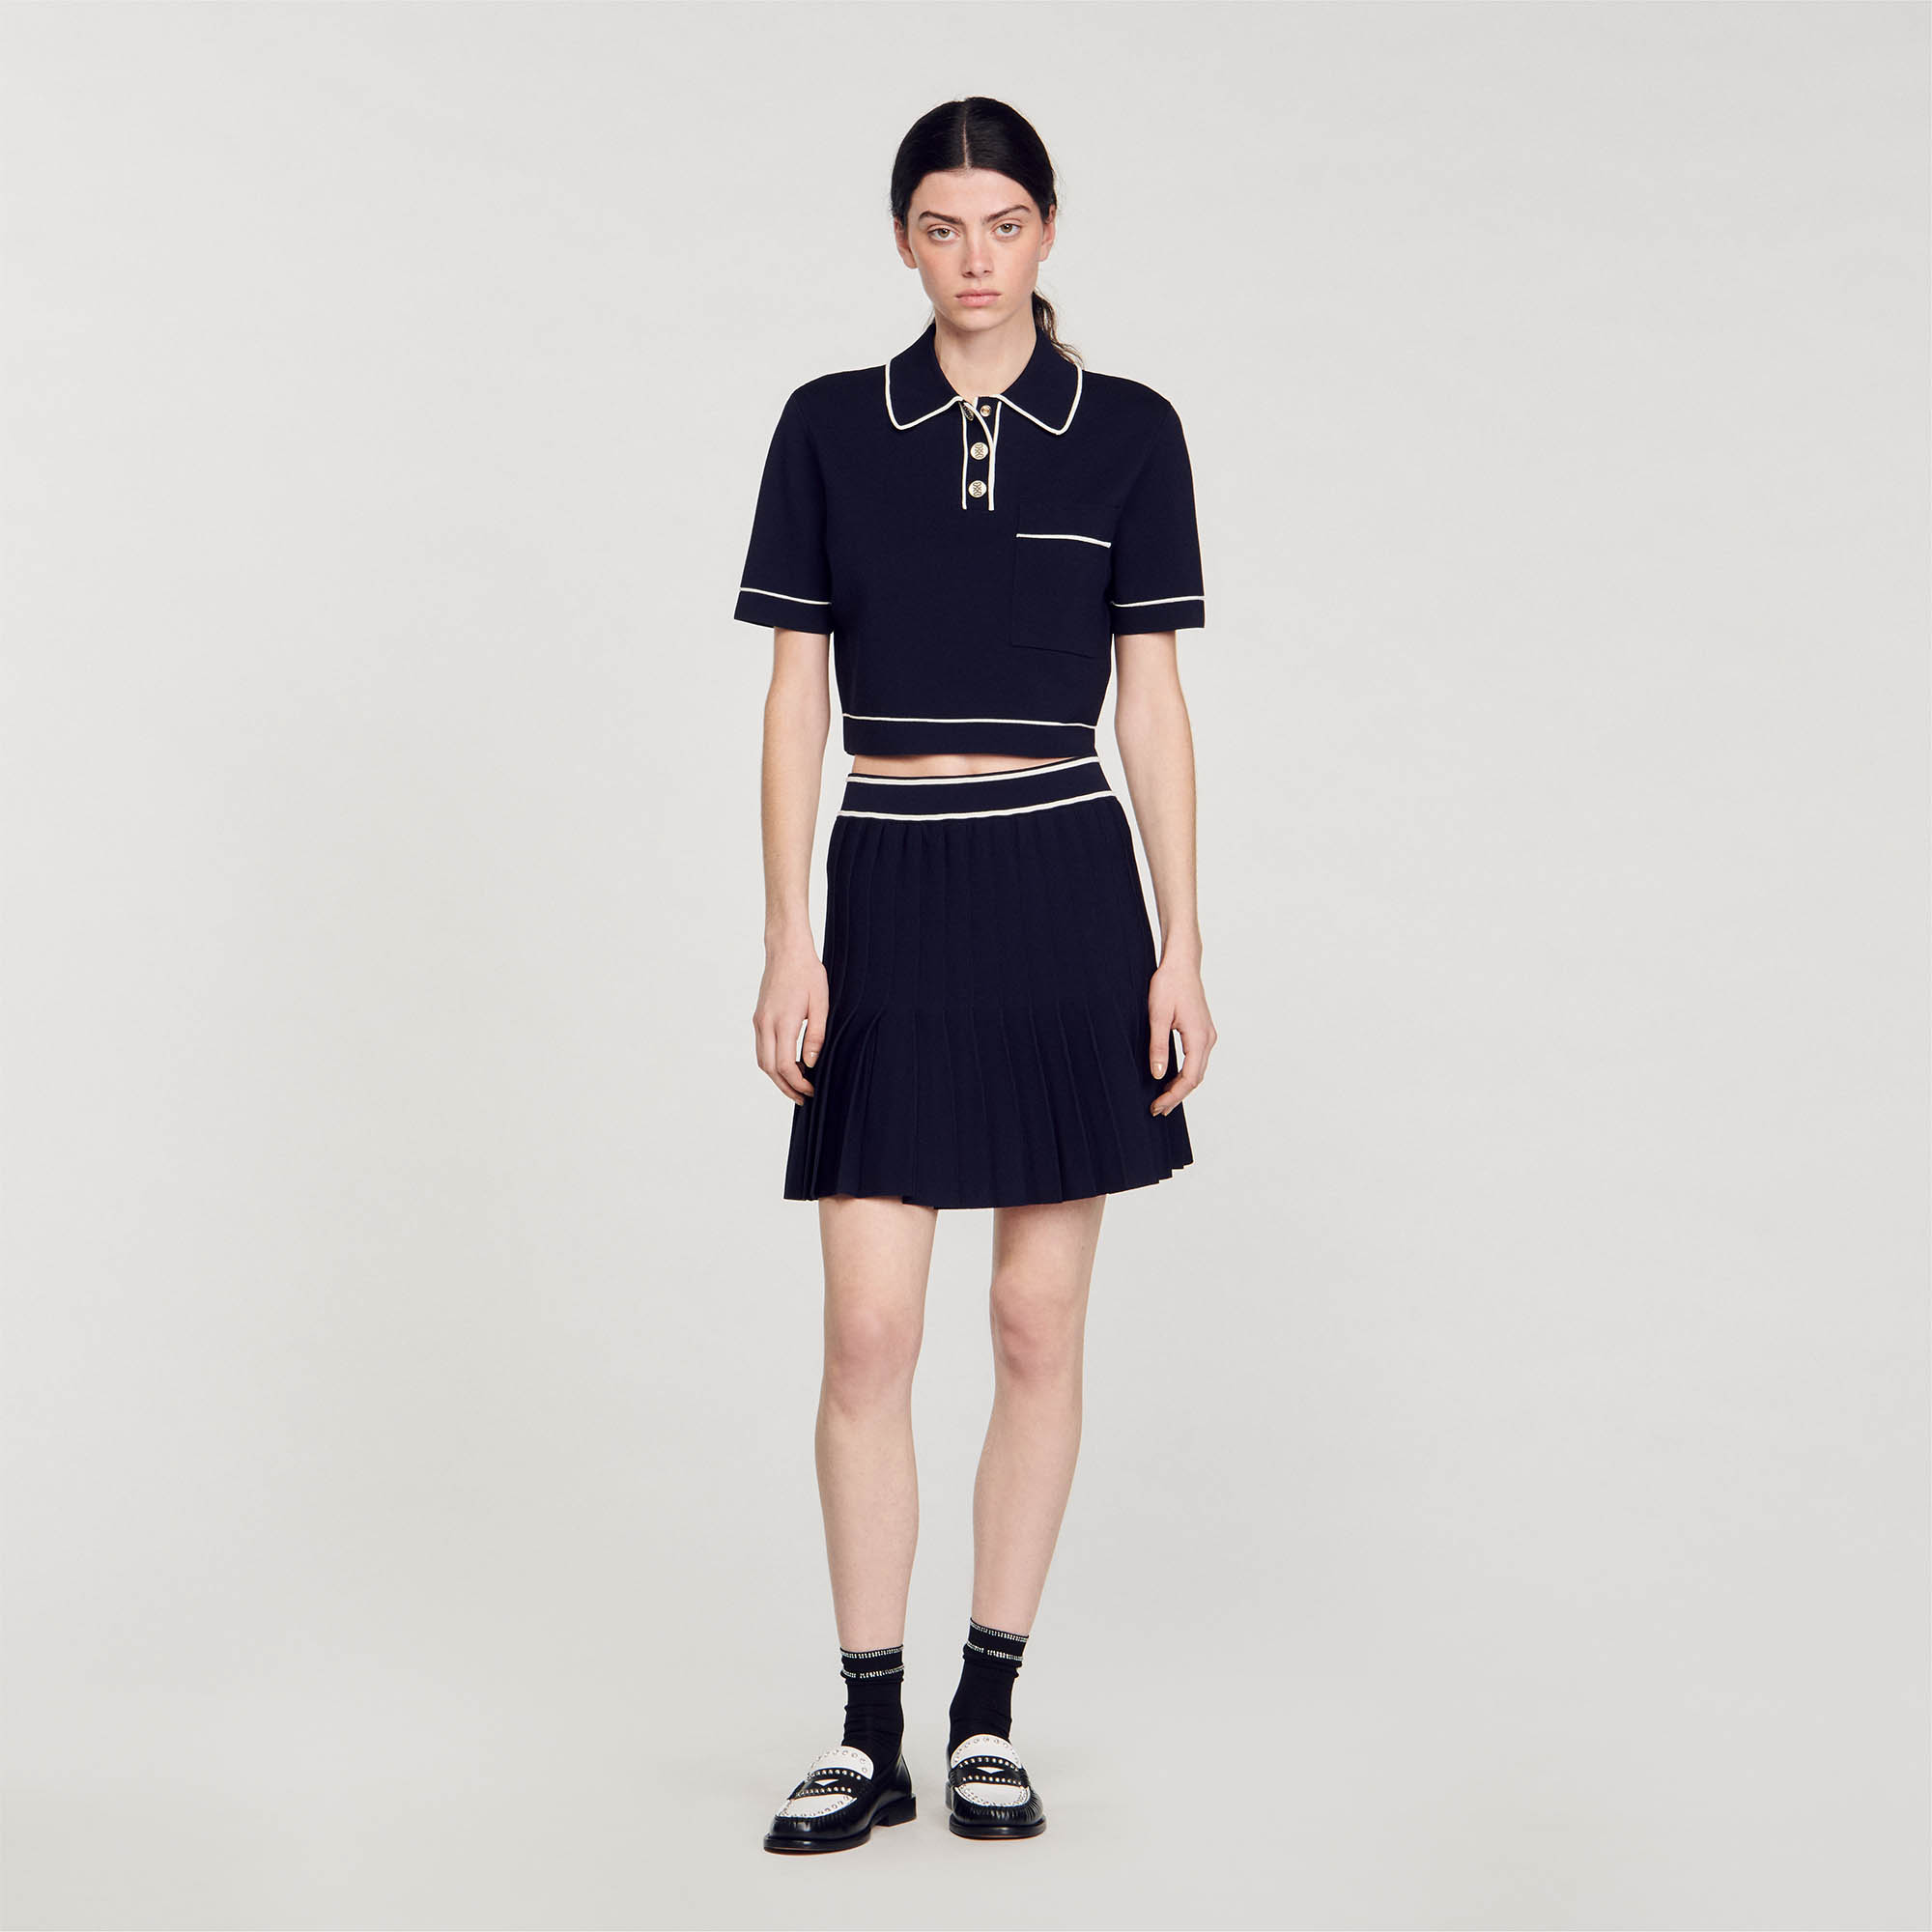 Sandro viscose Cropped short-sleeved knit sweater with press-stud polo collar, patch pocket on chest and embellished with contrast piping